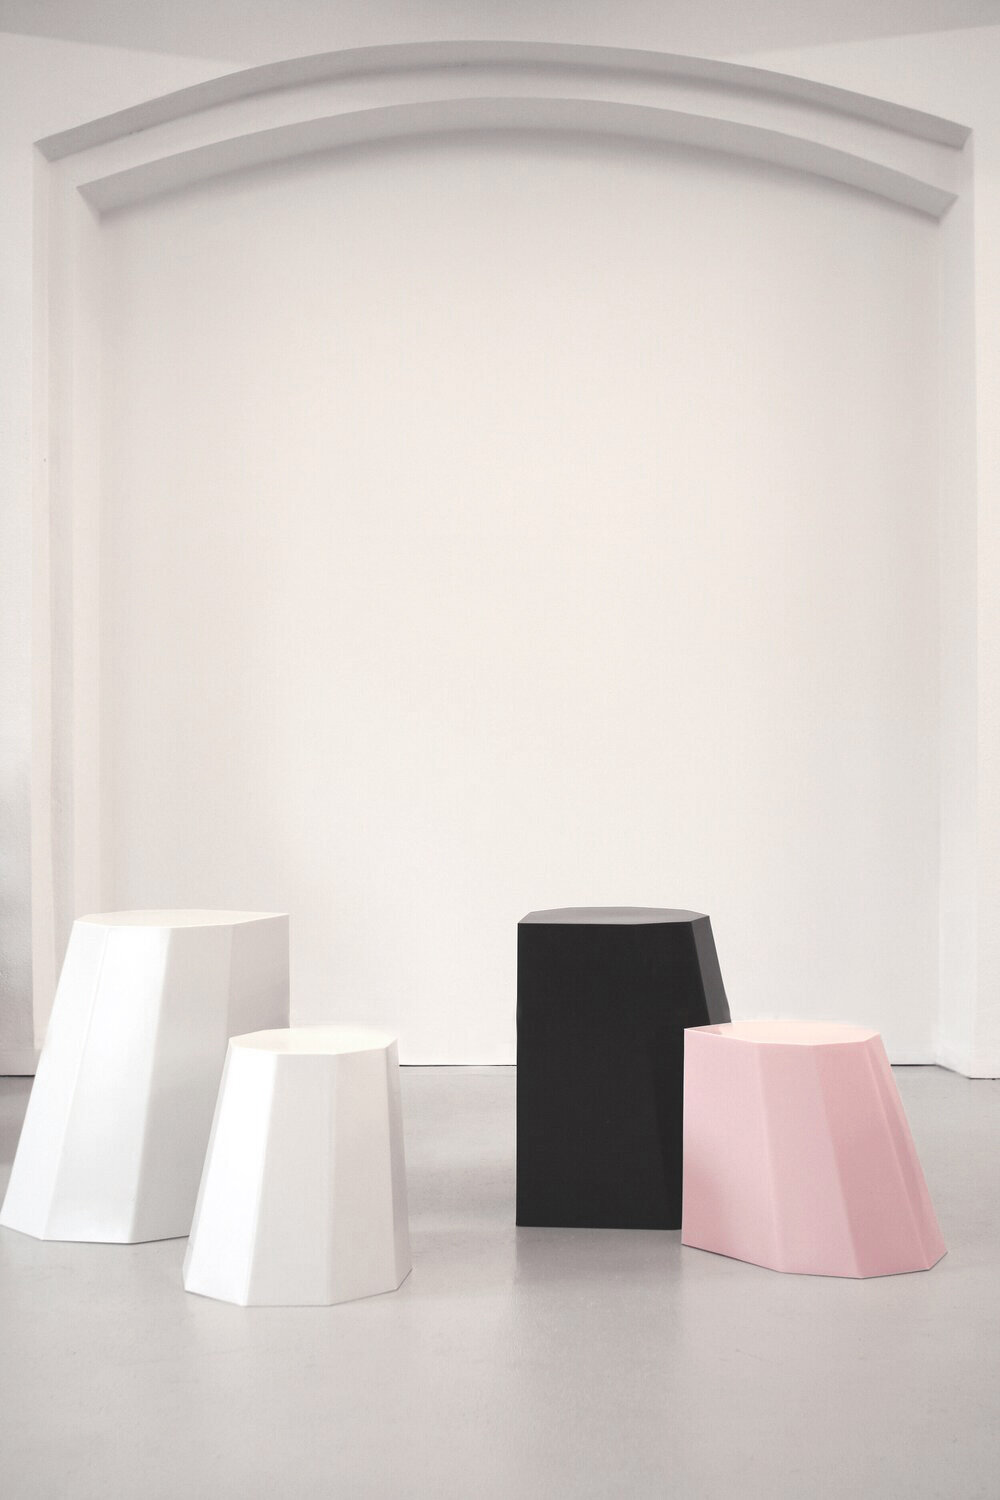 arnold circus stool by studio martino gamper | stackable design — analograum